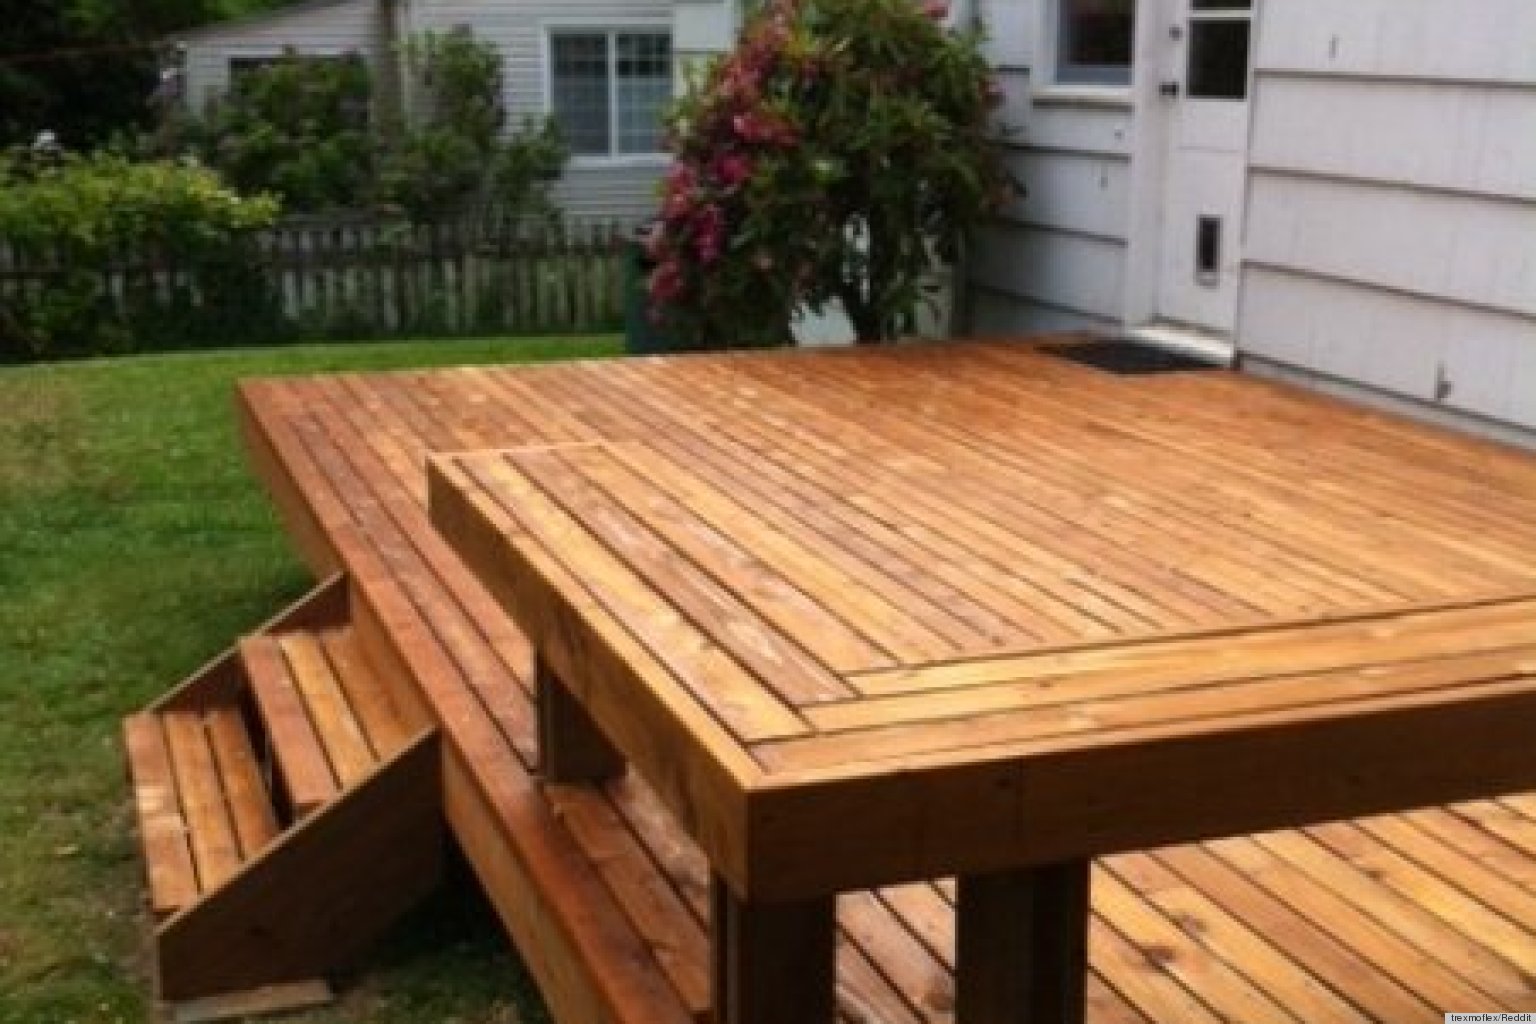 Building A Deck Is How One Couple Initiated Their New Home (PHOTOS)